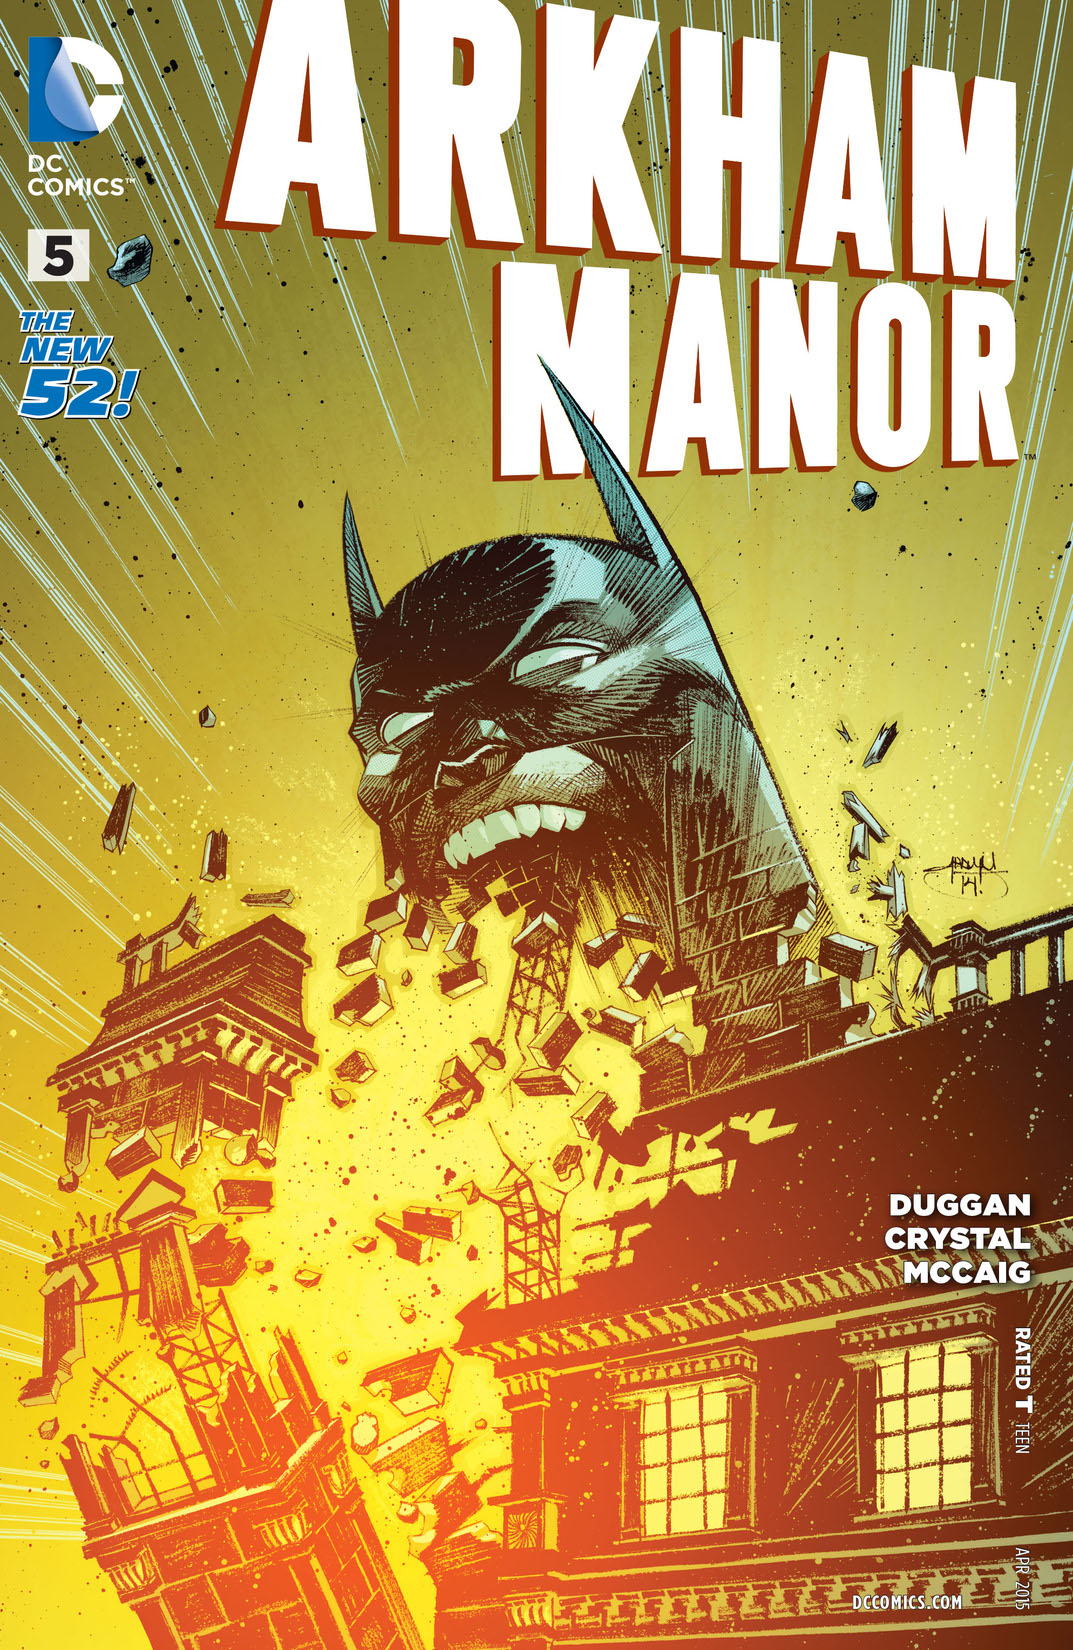 Arkham Manor #5 preview images